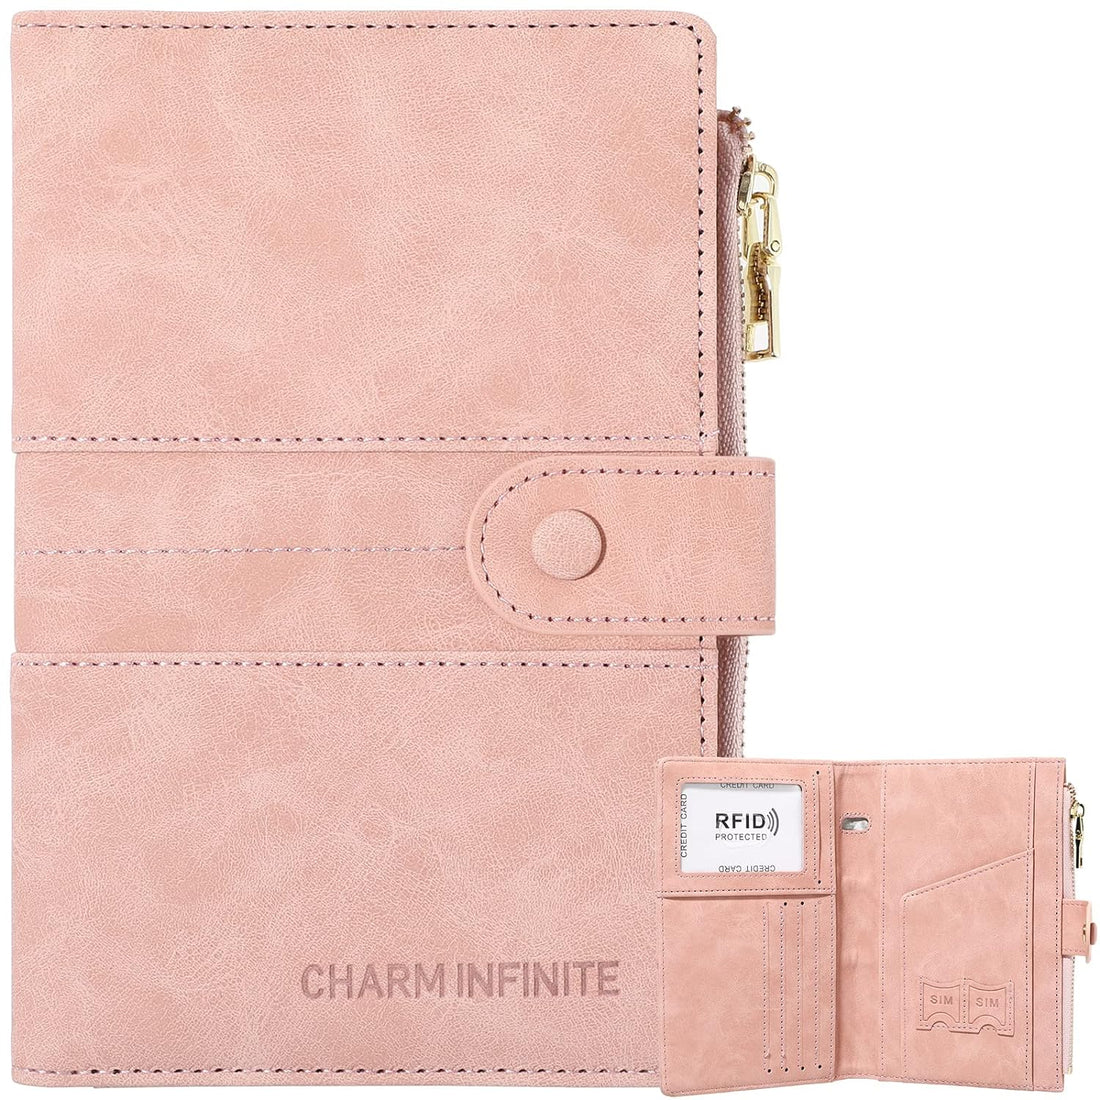 Passport and Vaccine Card Holder Combo, RFID Blocking Passport Holder Wallet Passport Cover Card Slots, Leather Passport Case Travel Wallet for Women and Men, Pink, Practical